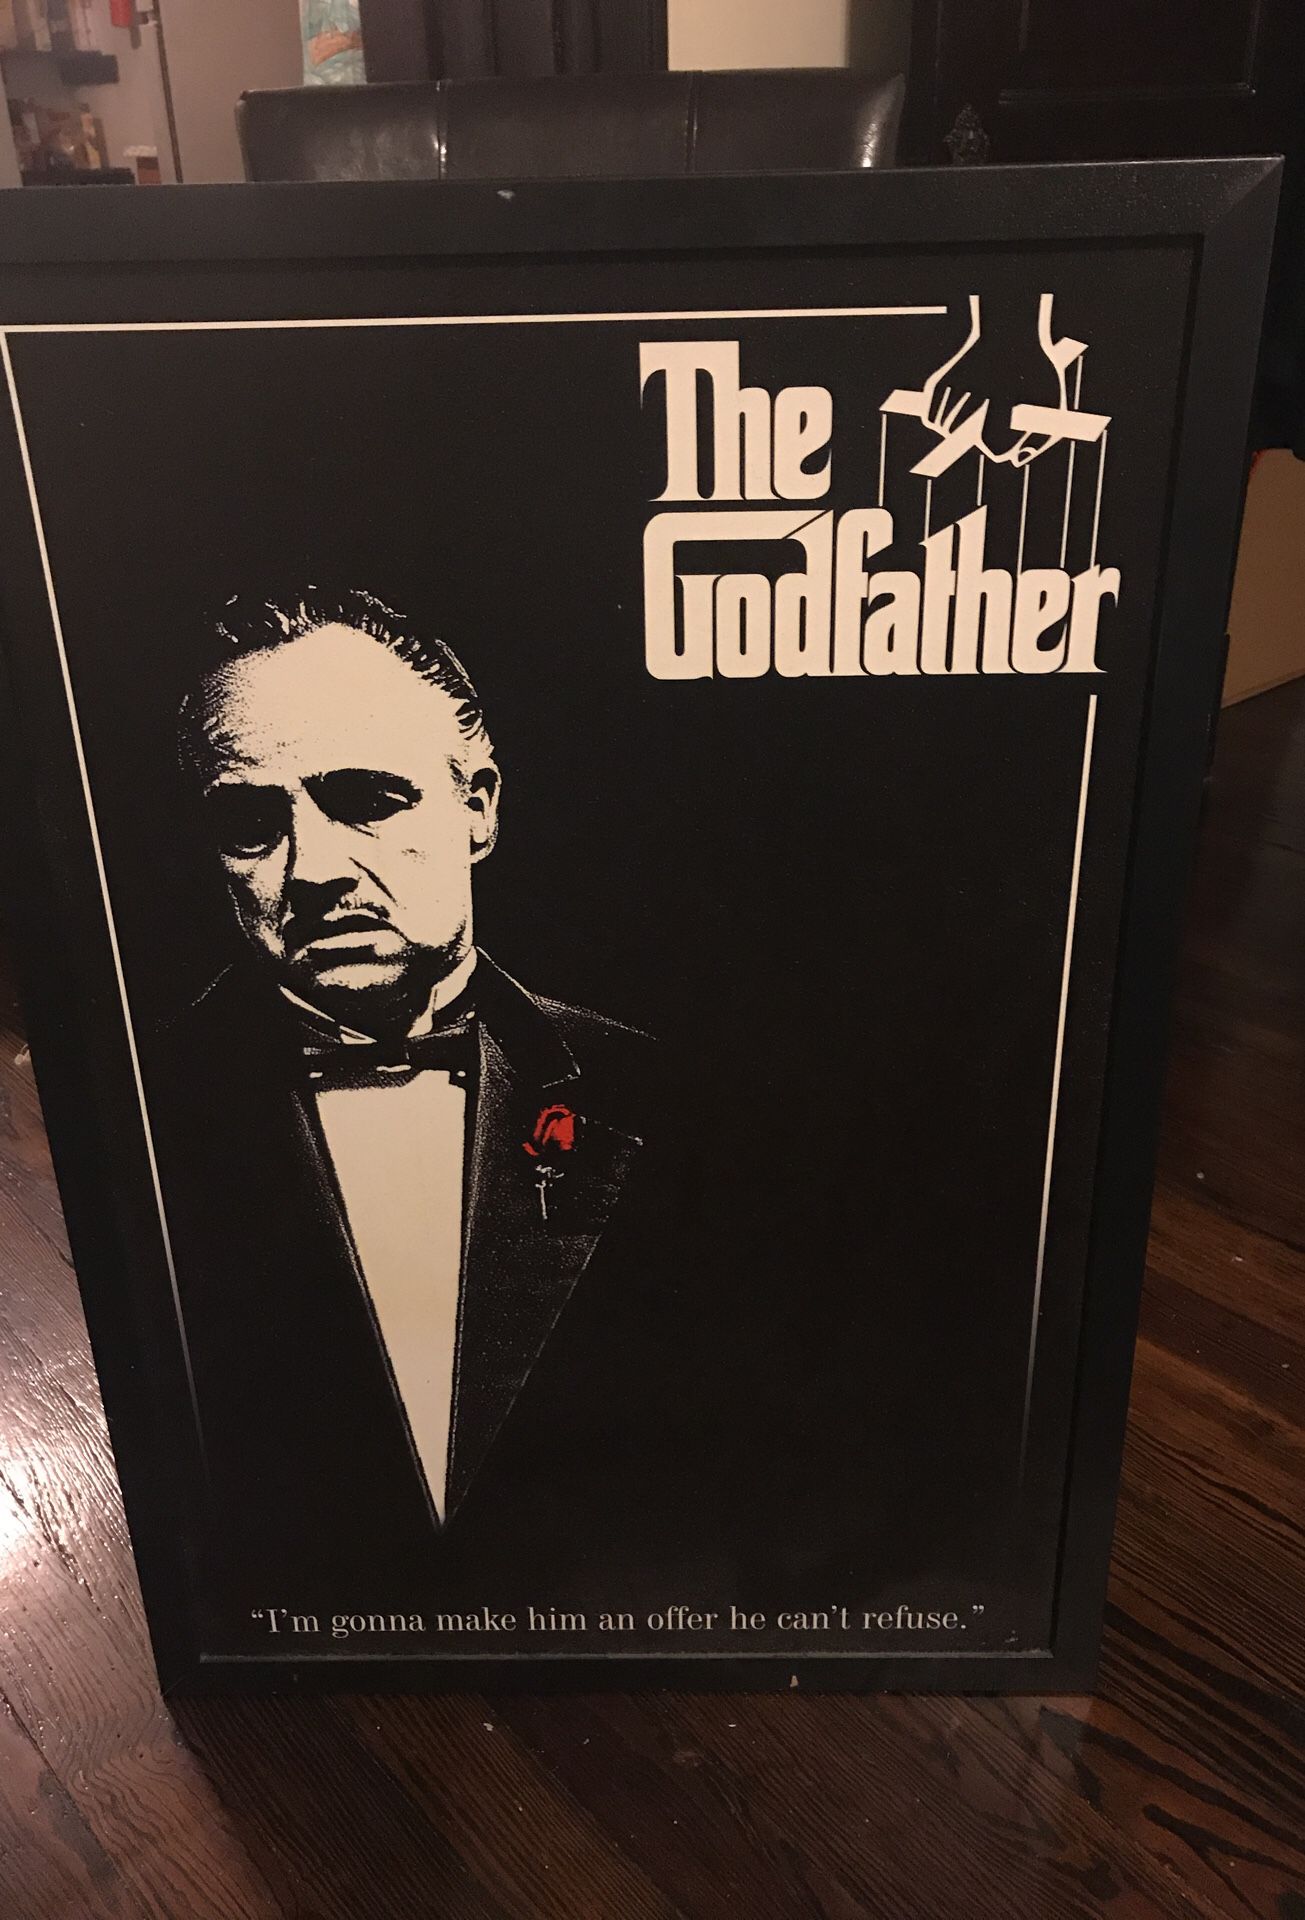 Godfather picture